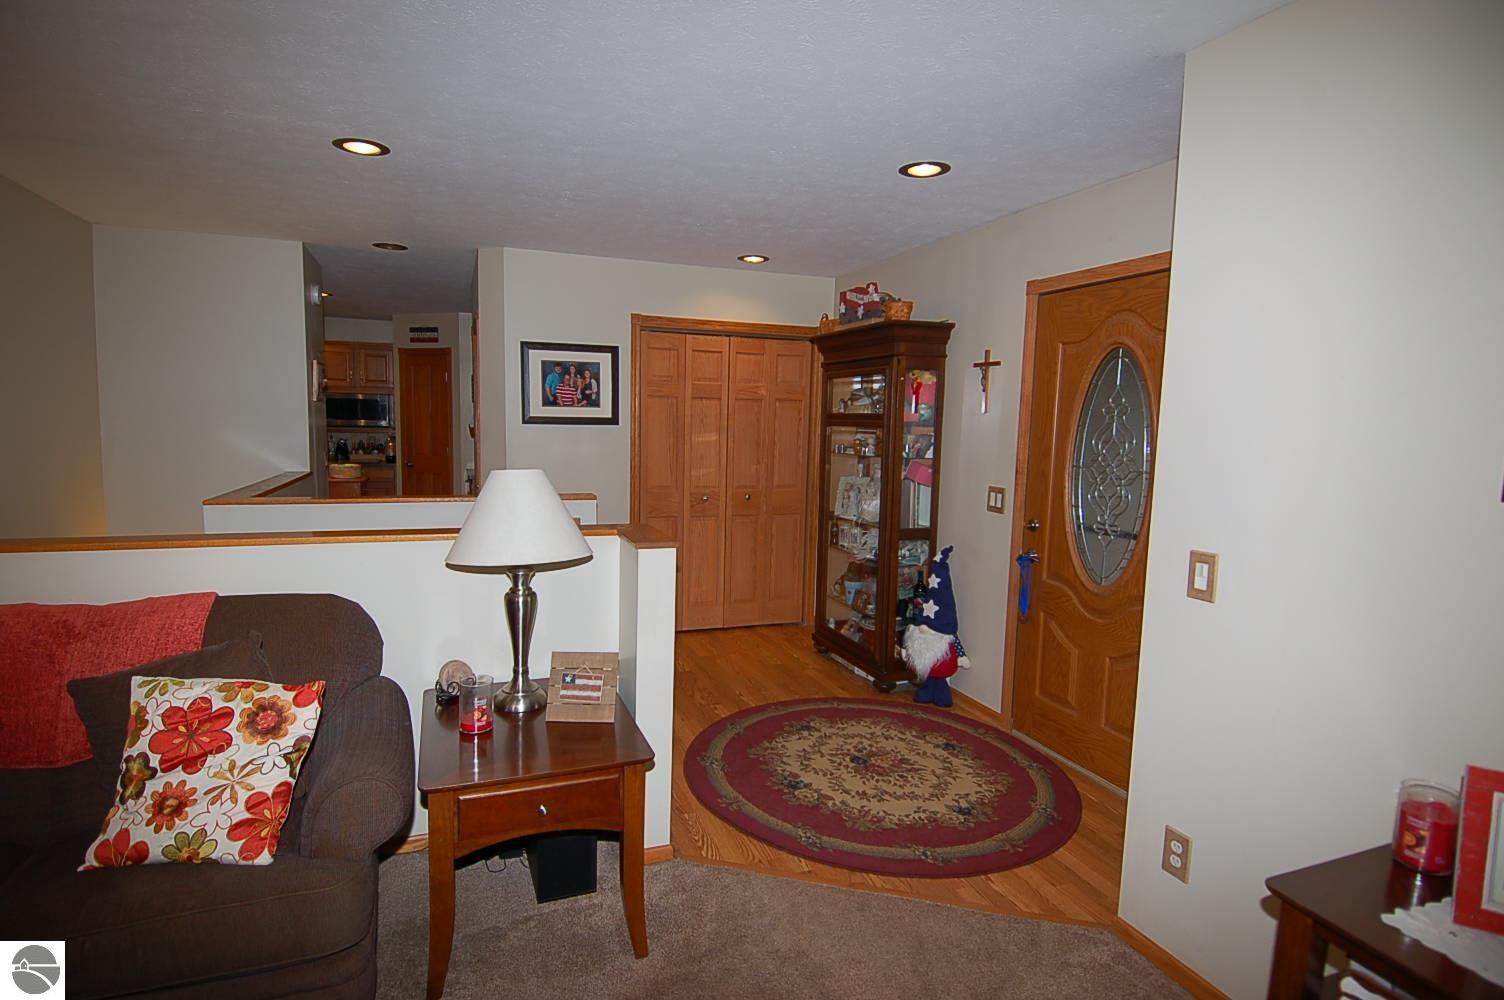 7681 Canthook Drive, Cadillac, MI 49601 photo 9 of 47